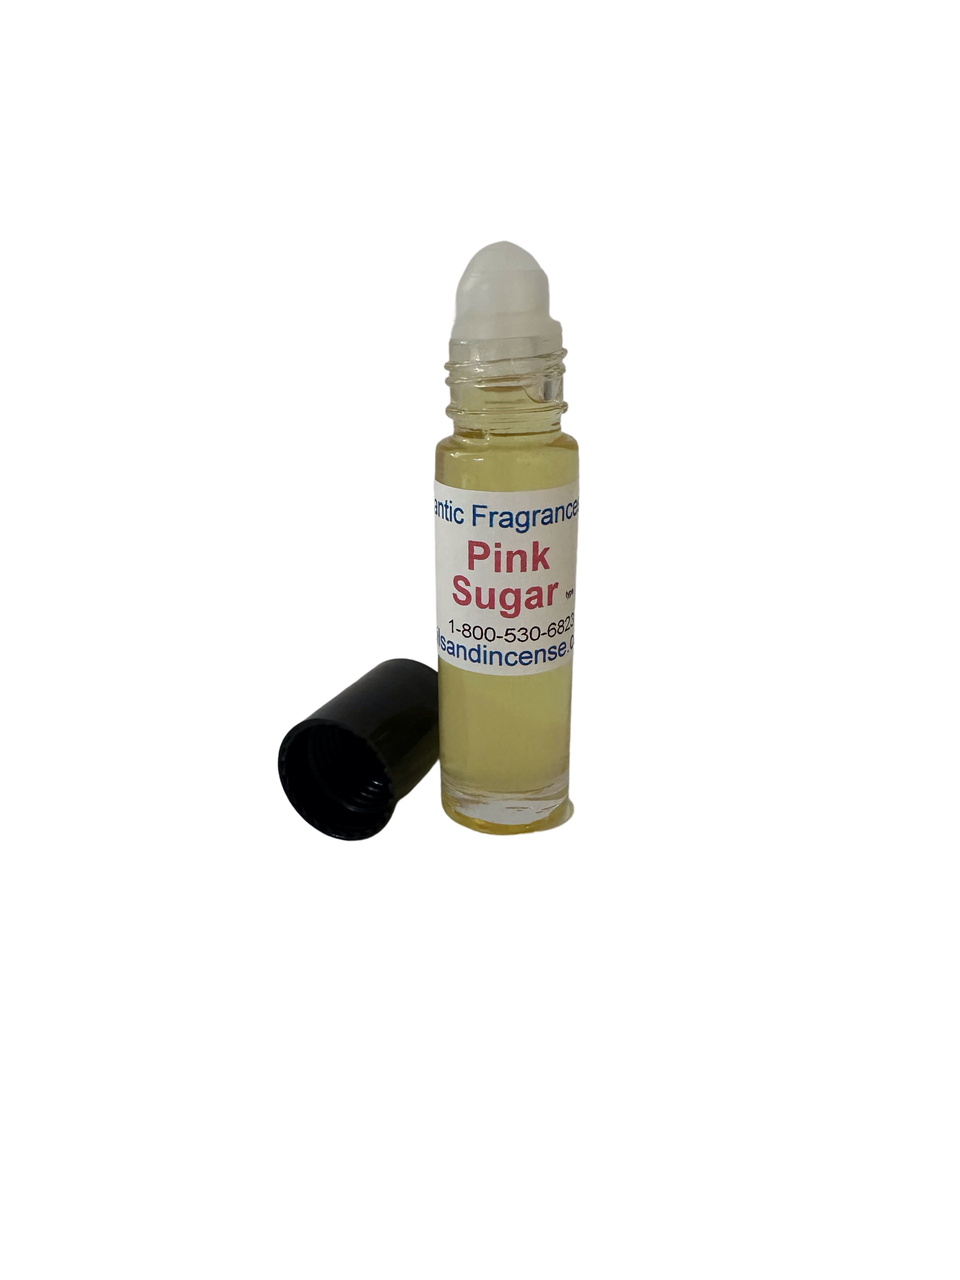 Pink Sugar Roll on Perfume Oil for Teens